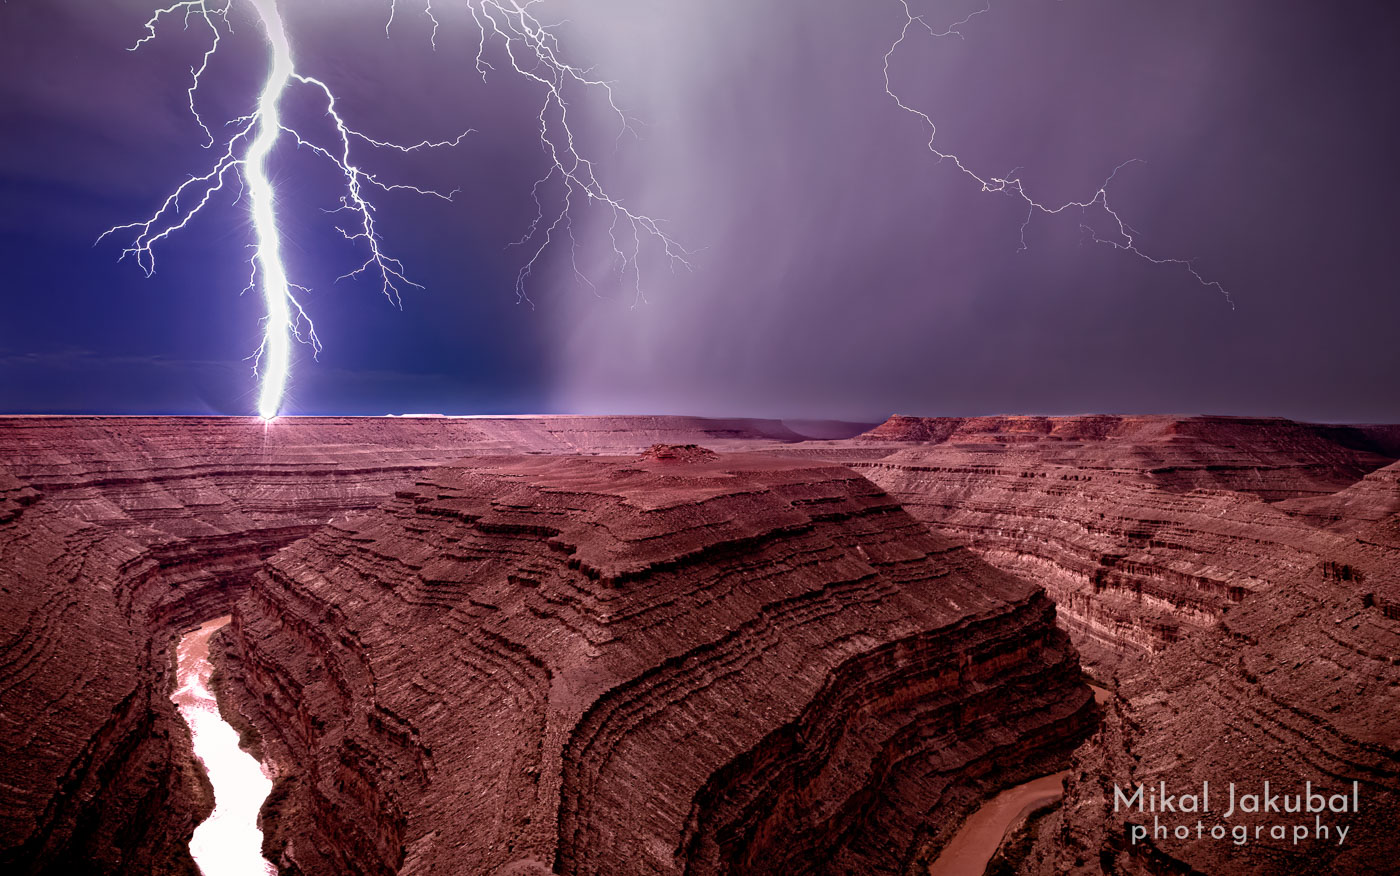 A night shot of a gigantic lightning bolt hitting the rim of a serpentine redrock canyon with a muddy brown river in the bottom.